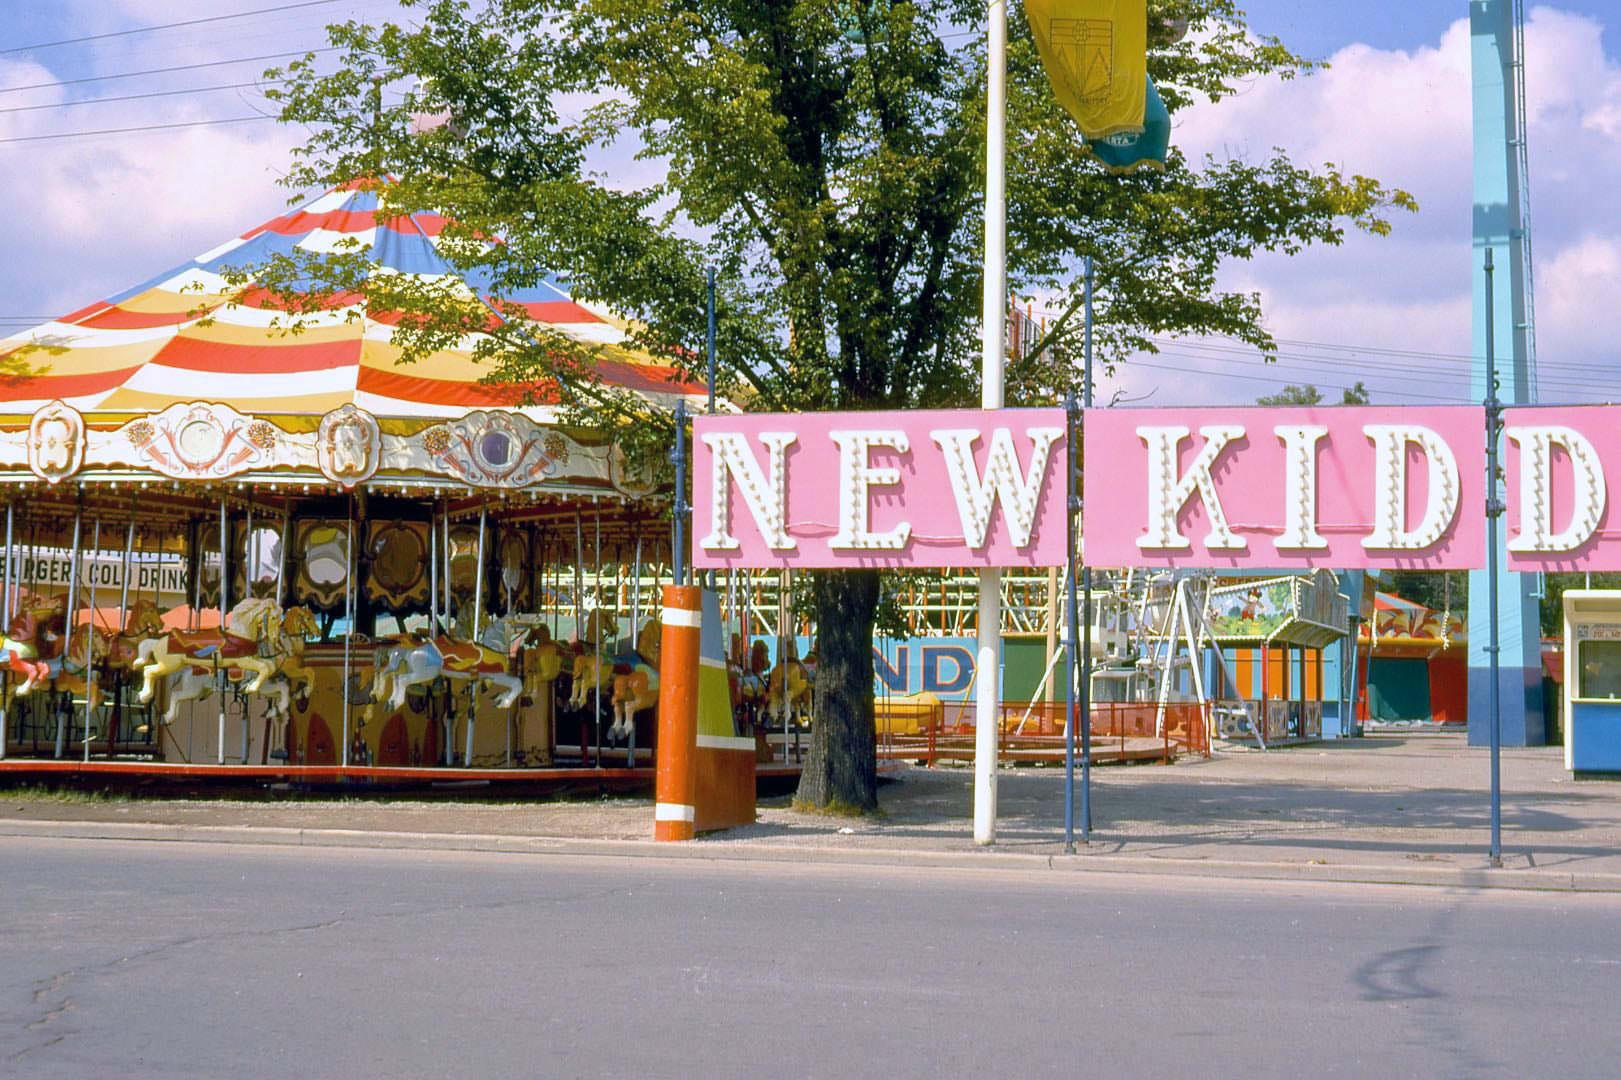 New Kiddy Land', CNE grounds. Captured by my father in August 1968.